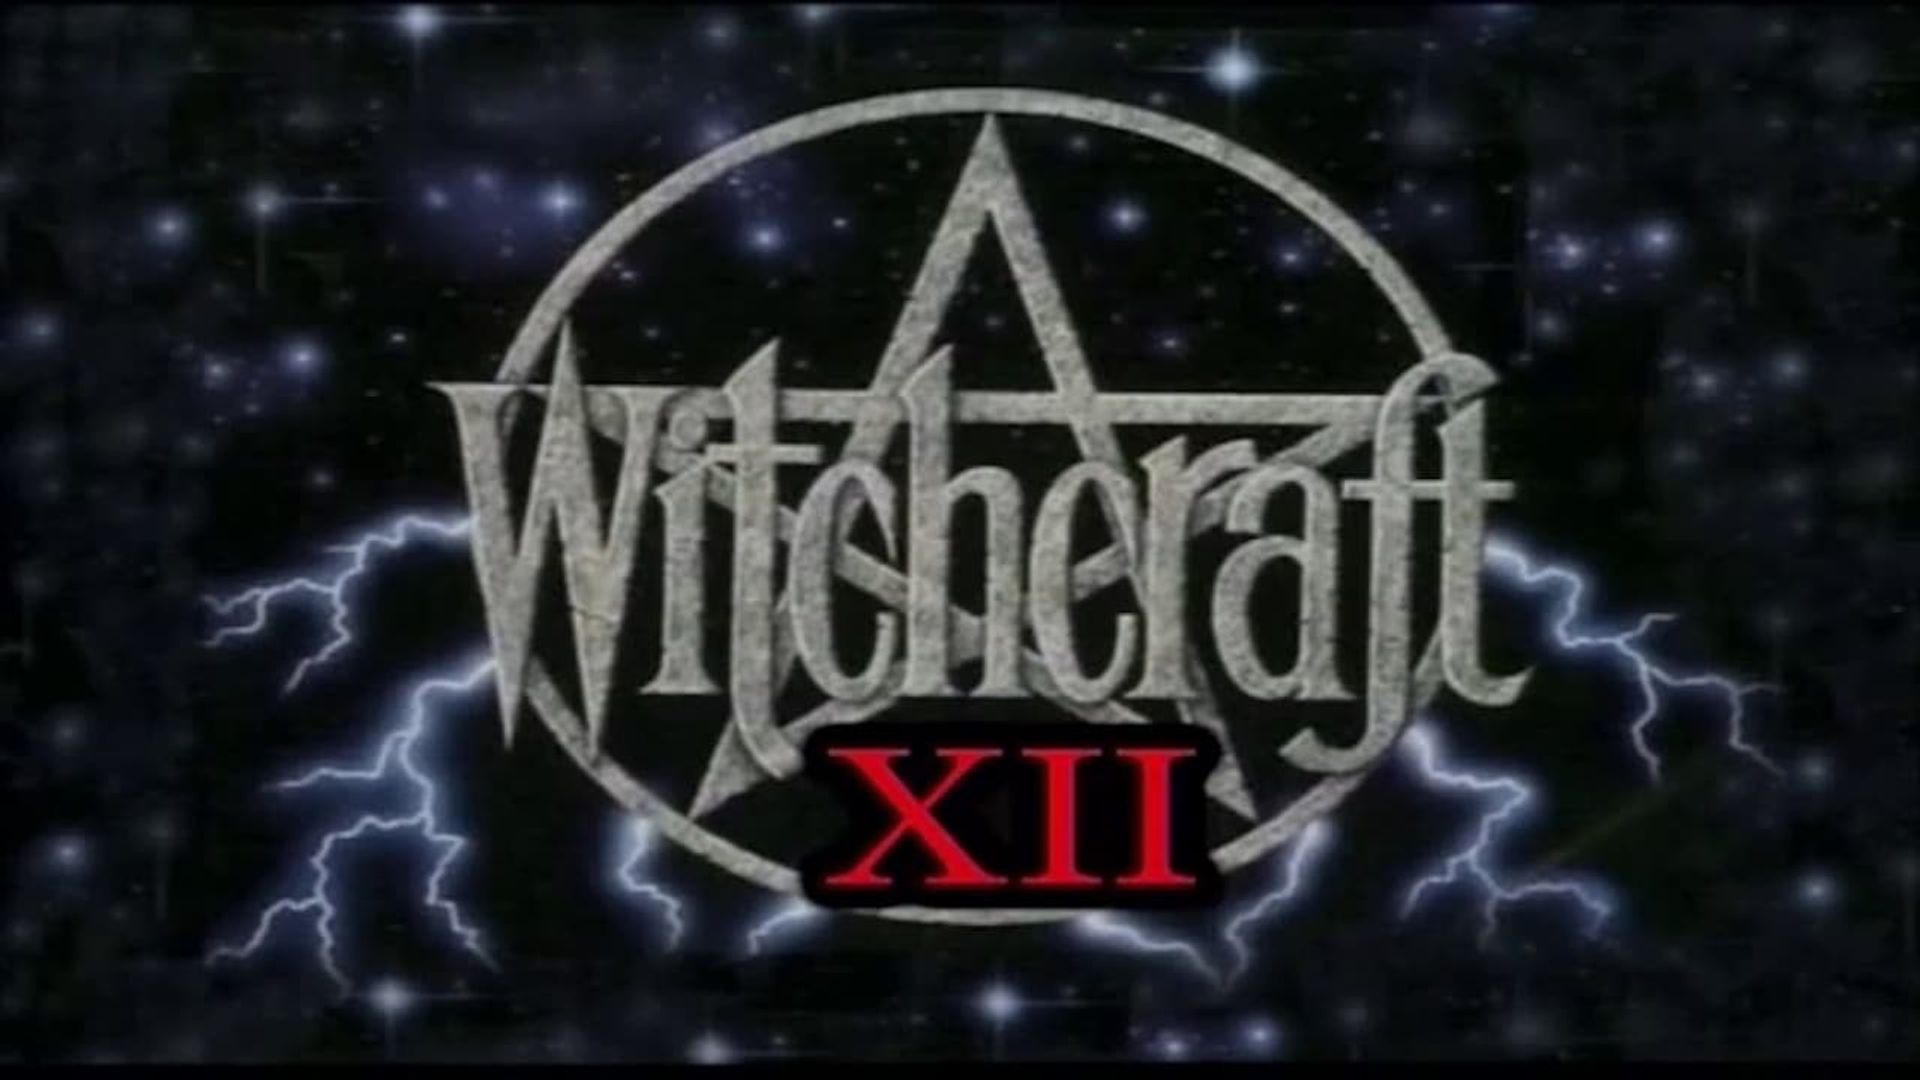 Witchcraft XII: In the Lair of the Serpent Backdrop